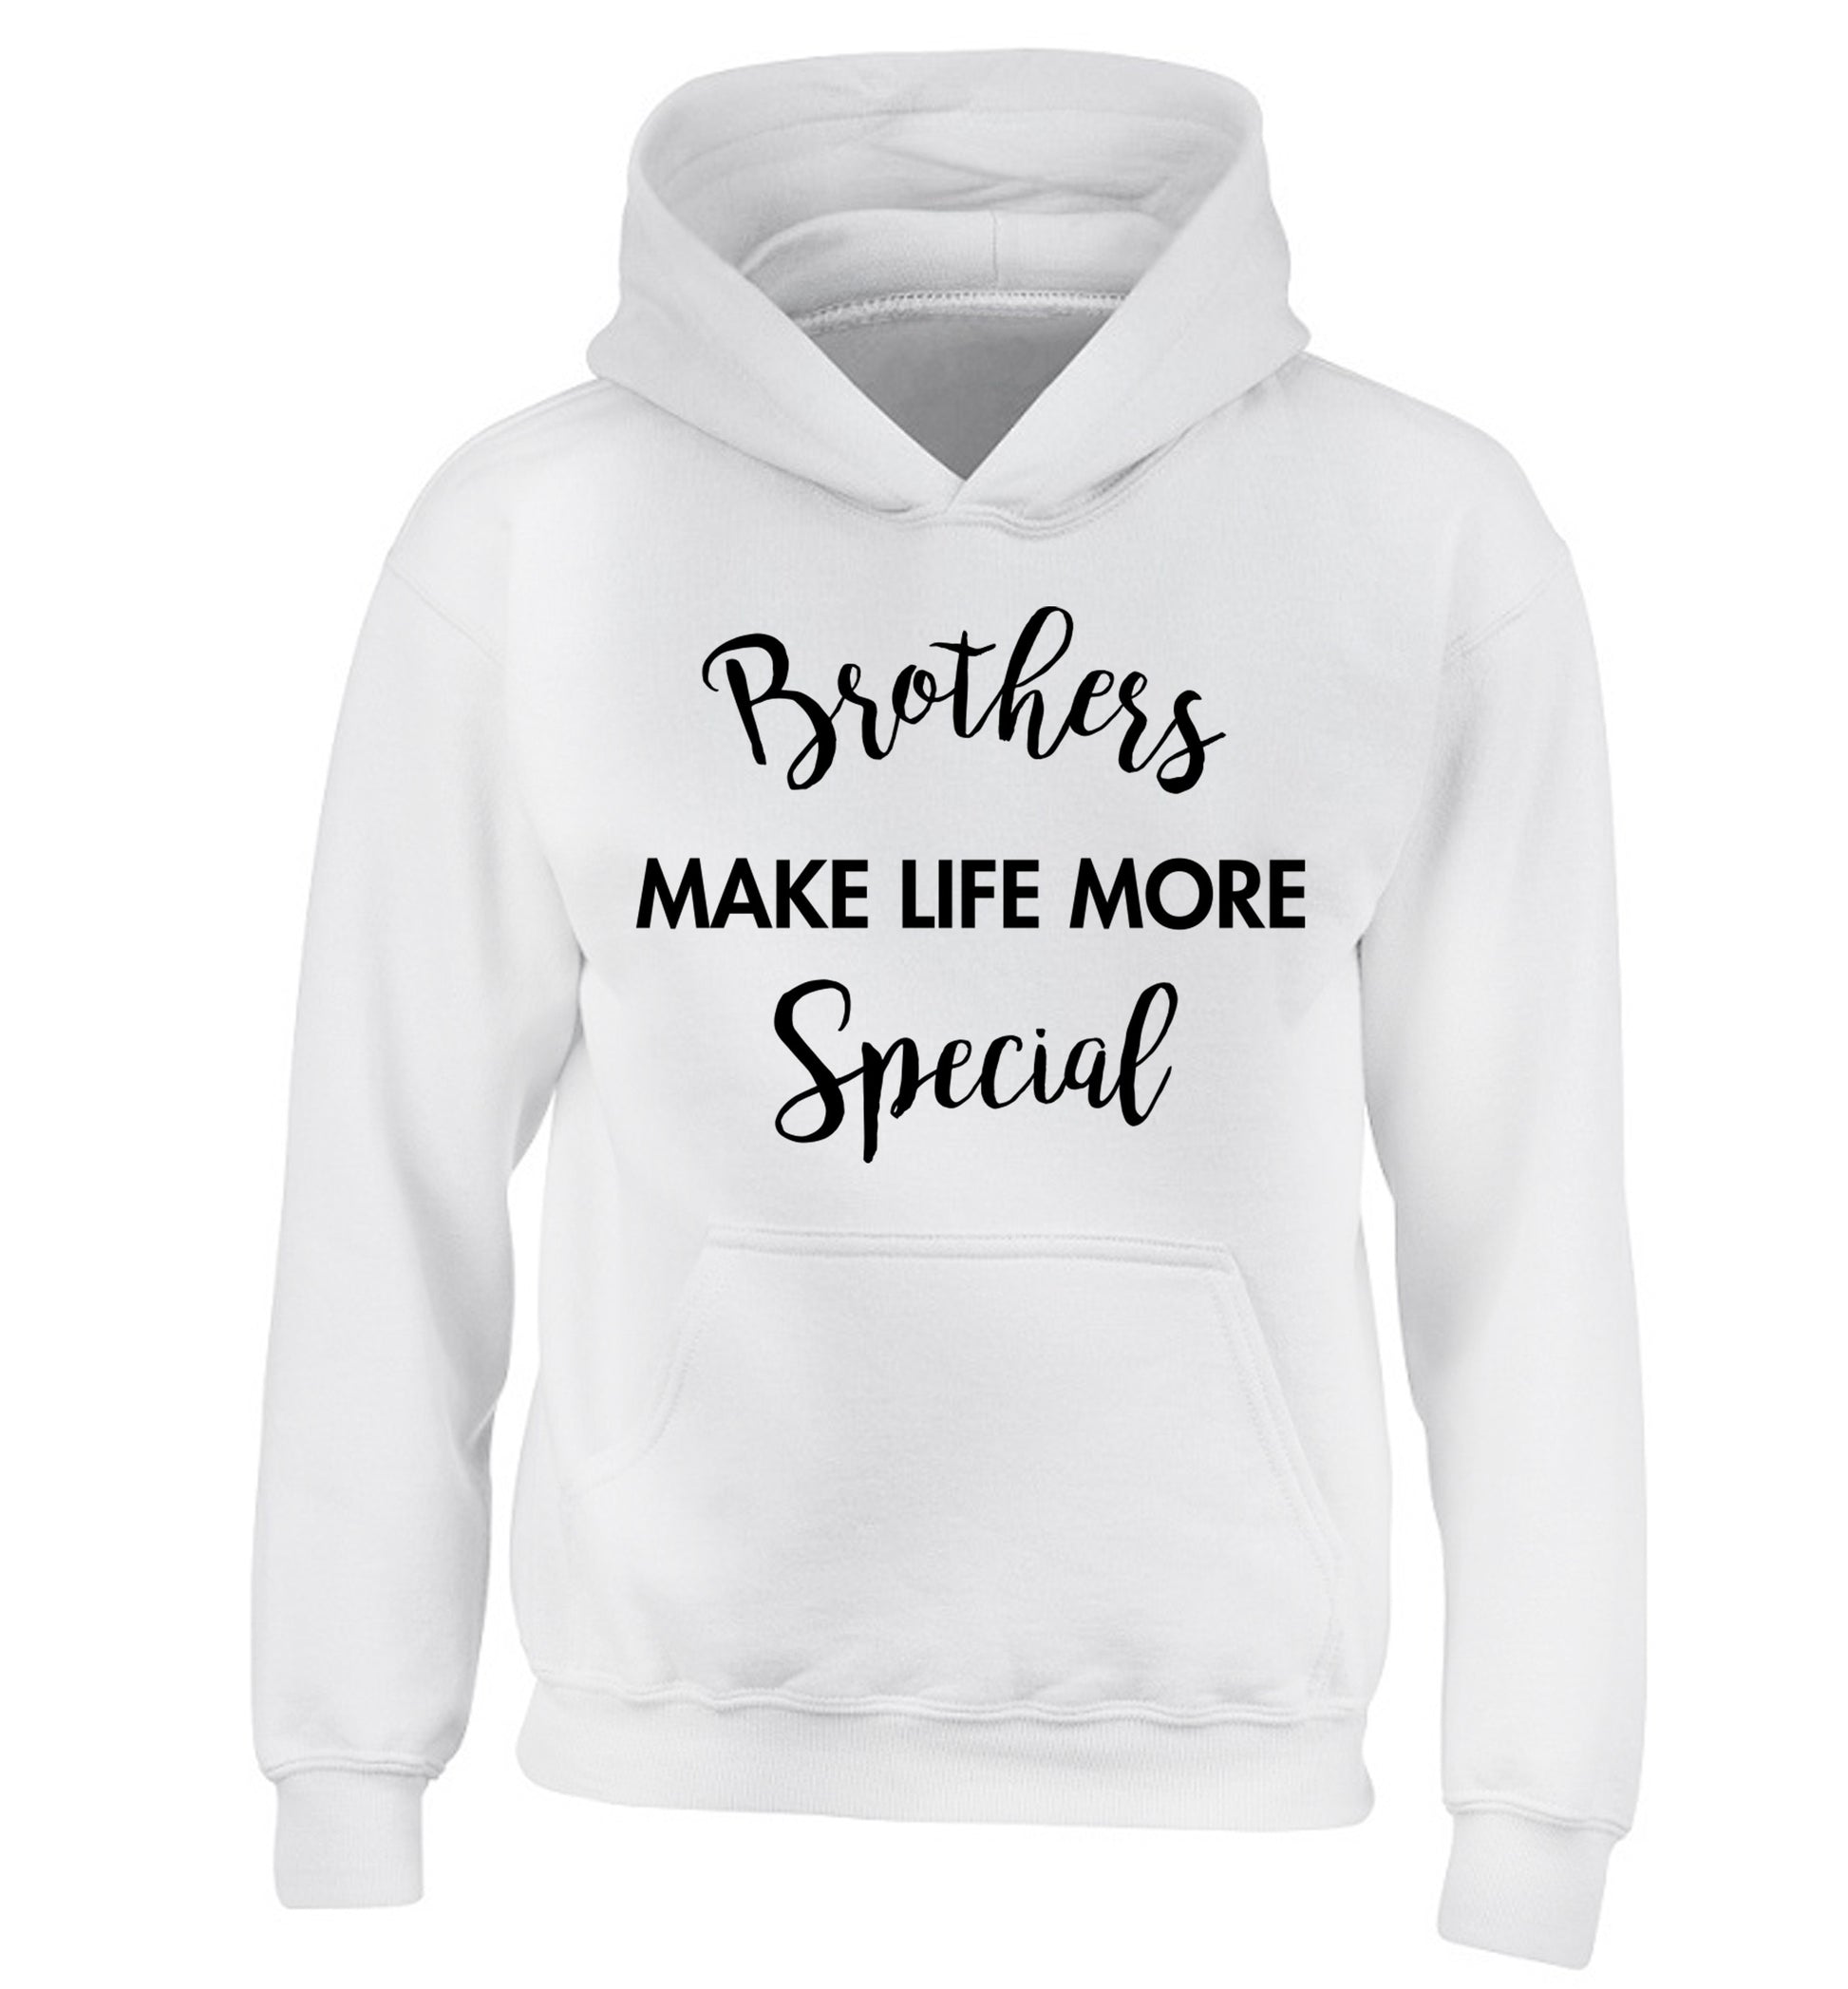 Brothers make life more special children's white hoodie 12-14 Years